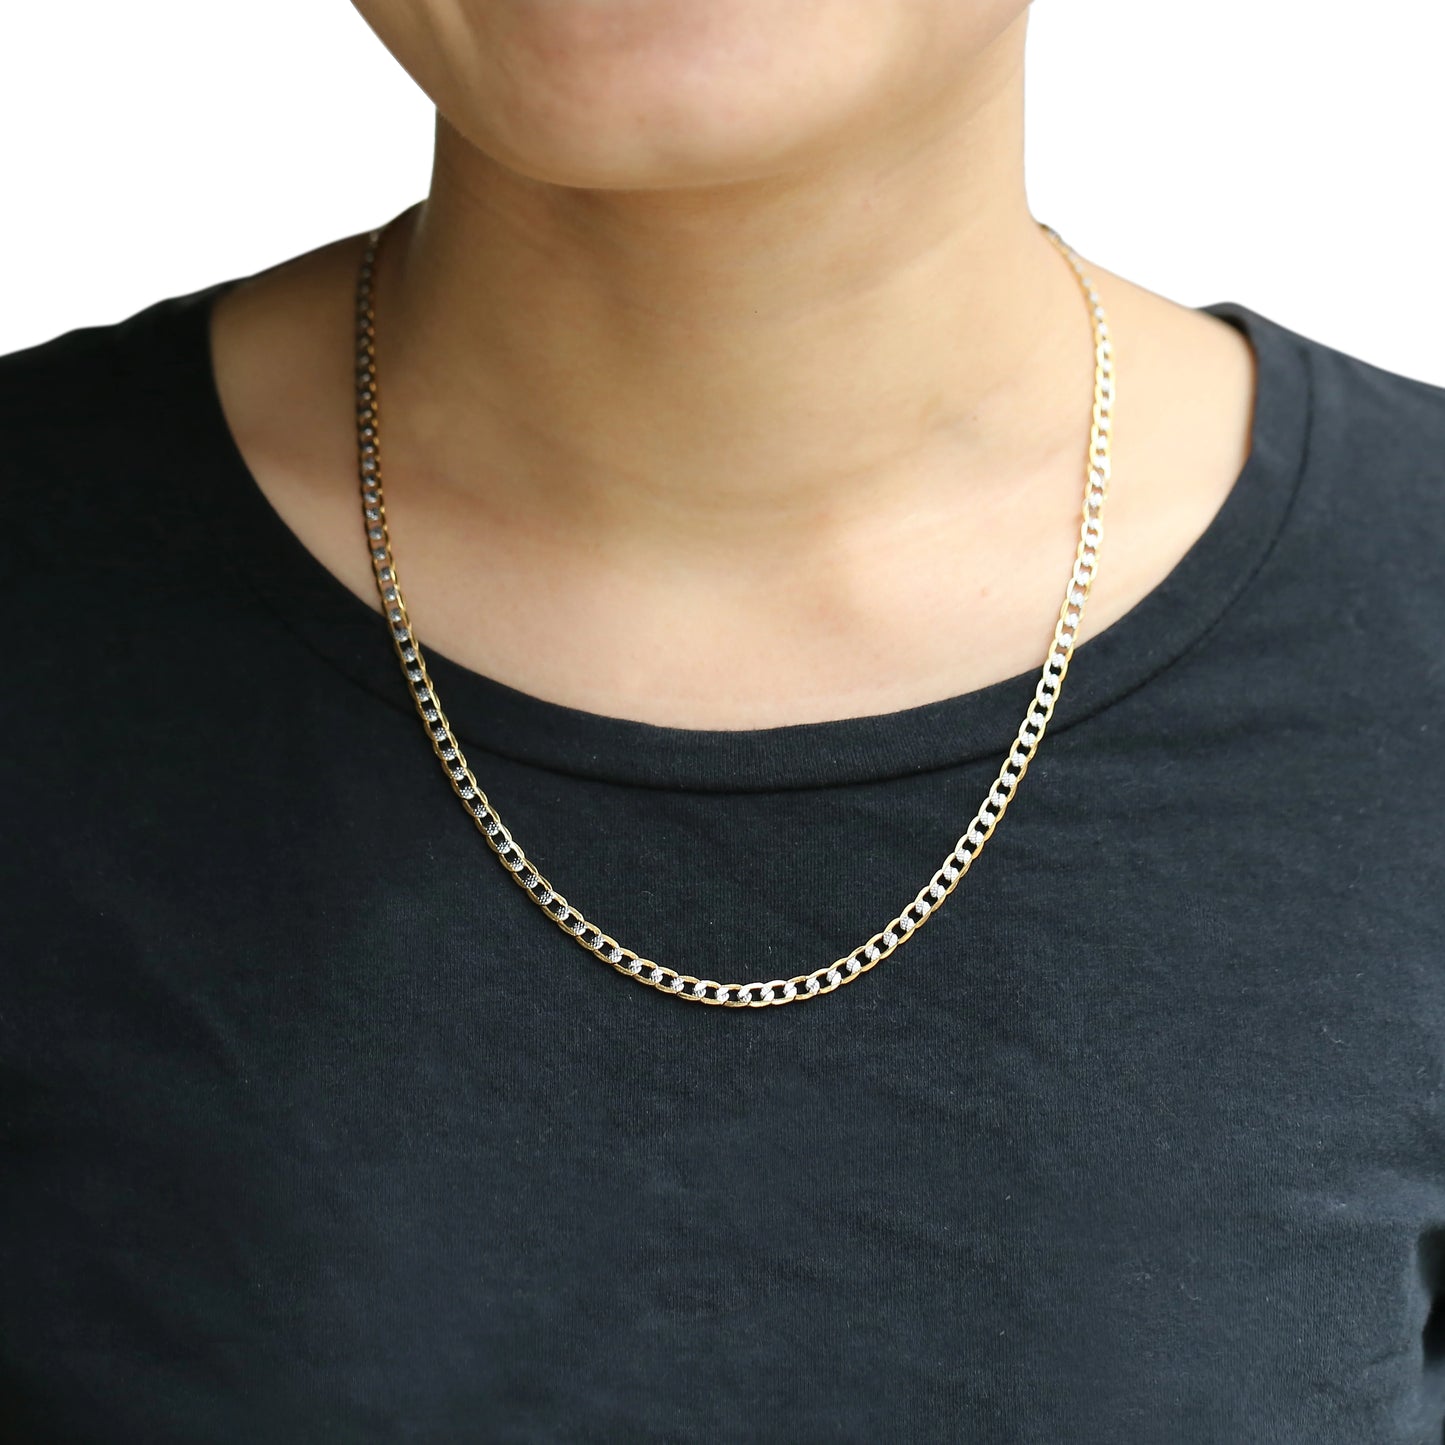 Trendsmax Gold Color Chain Necklace For Men Women  Wholesale Gifts